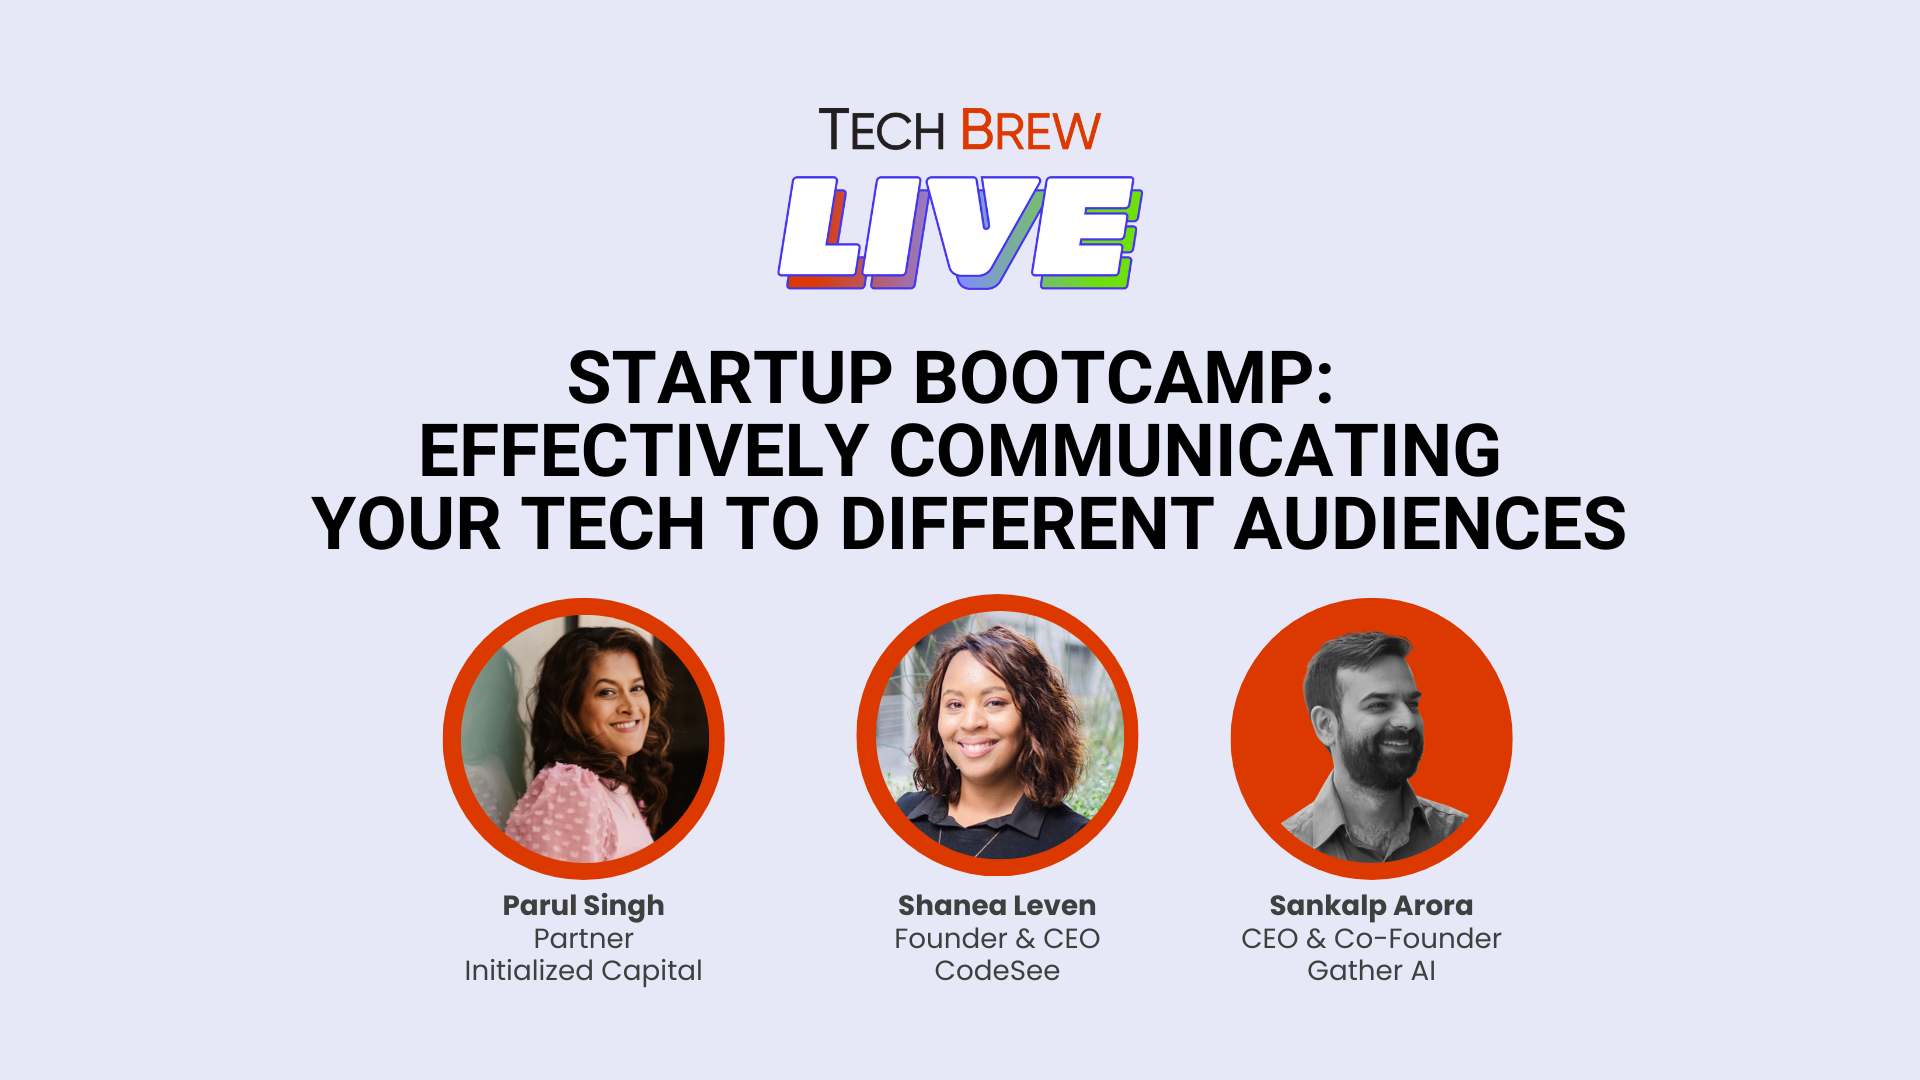 Tech Brew Live logo above "Startup Bootcamp: Effectively Communicating Your Tech to Different Audiences" text above three speaker headshots